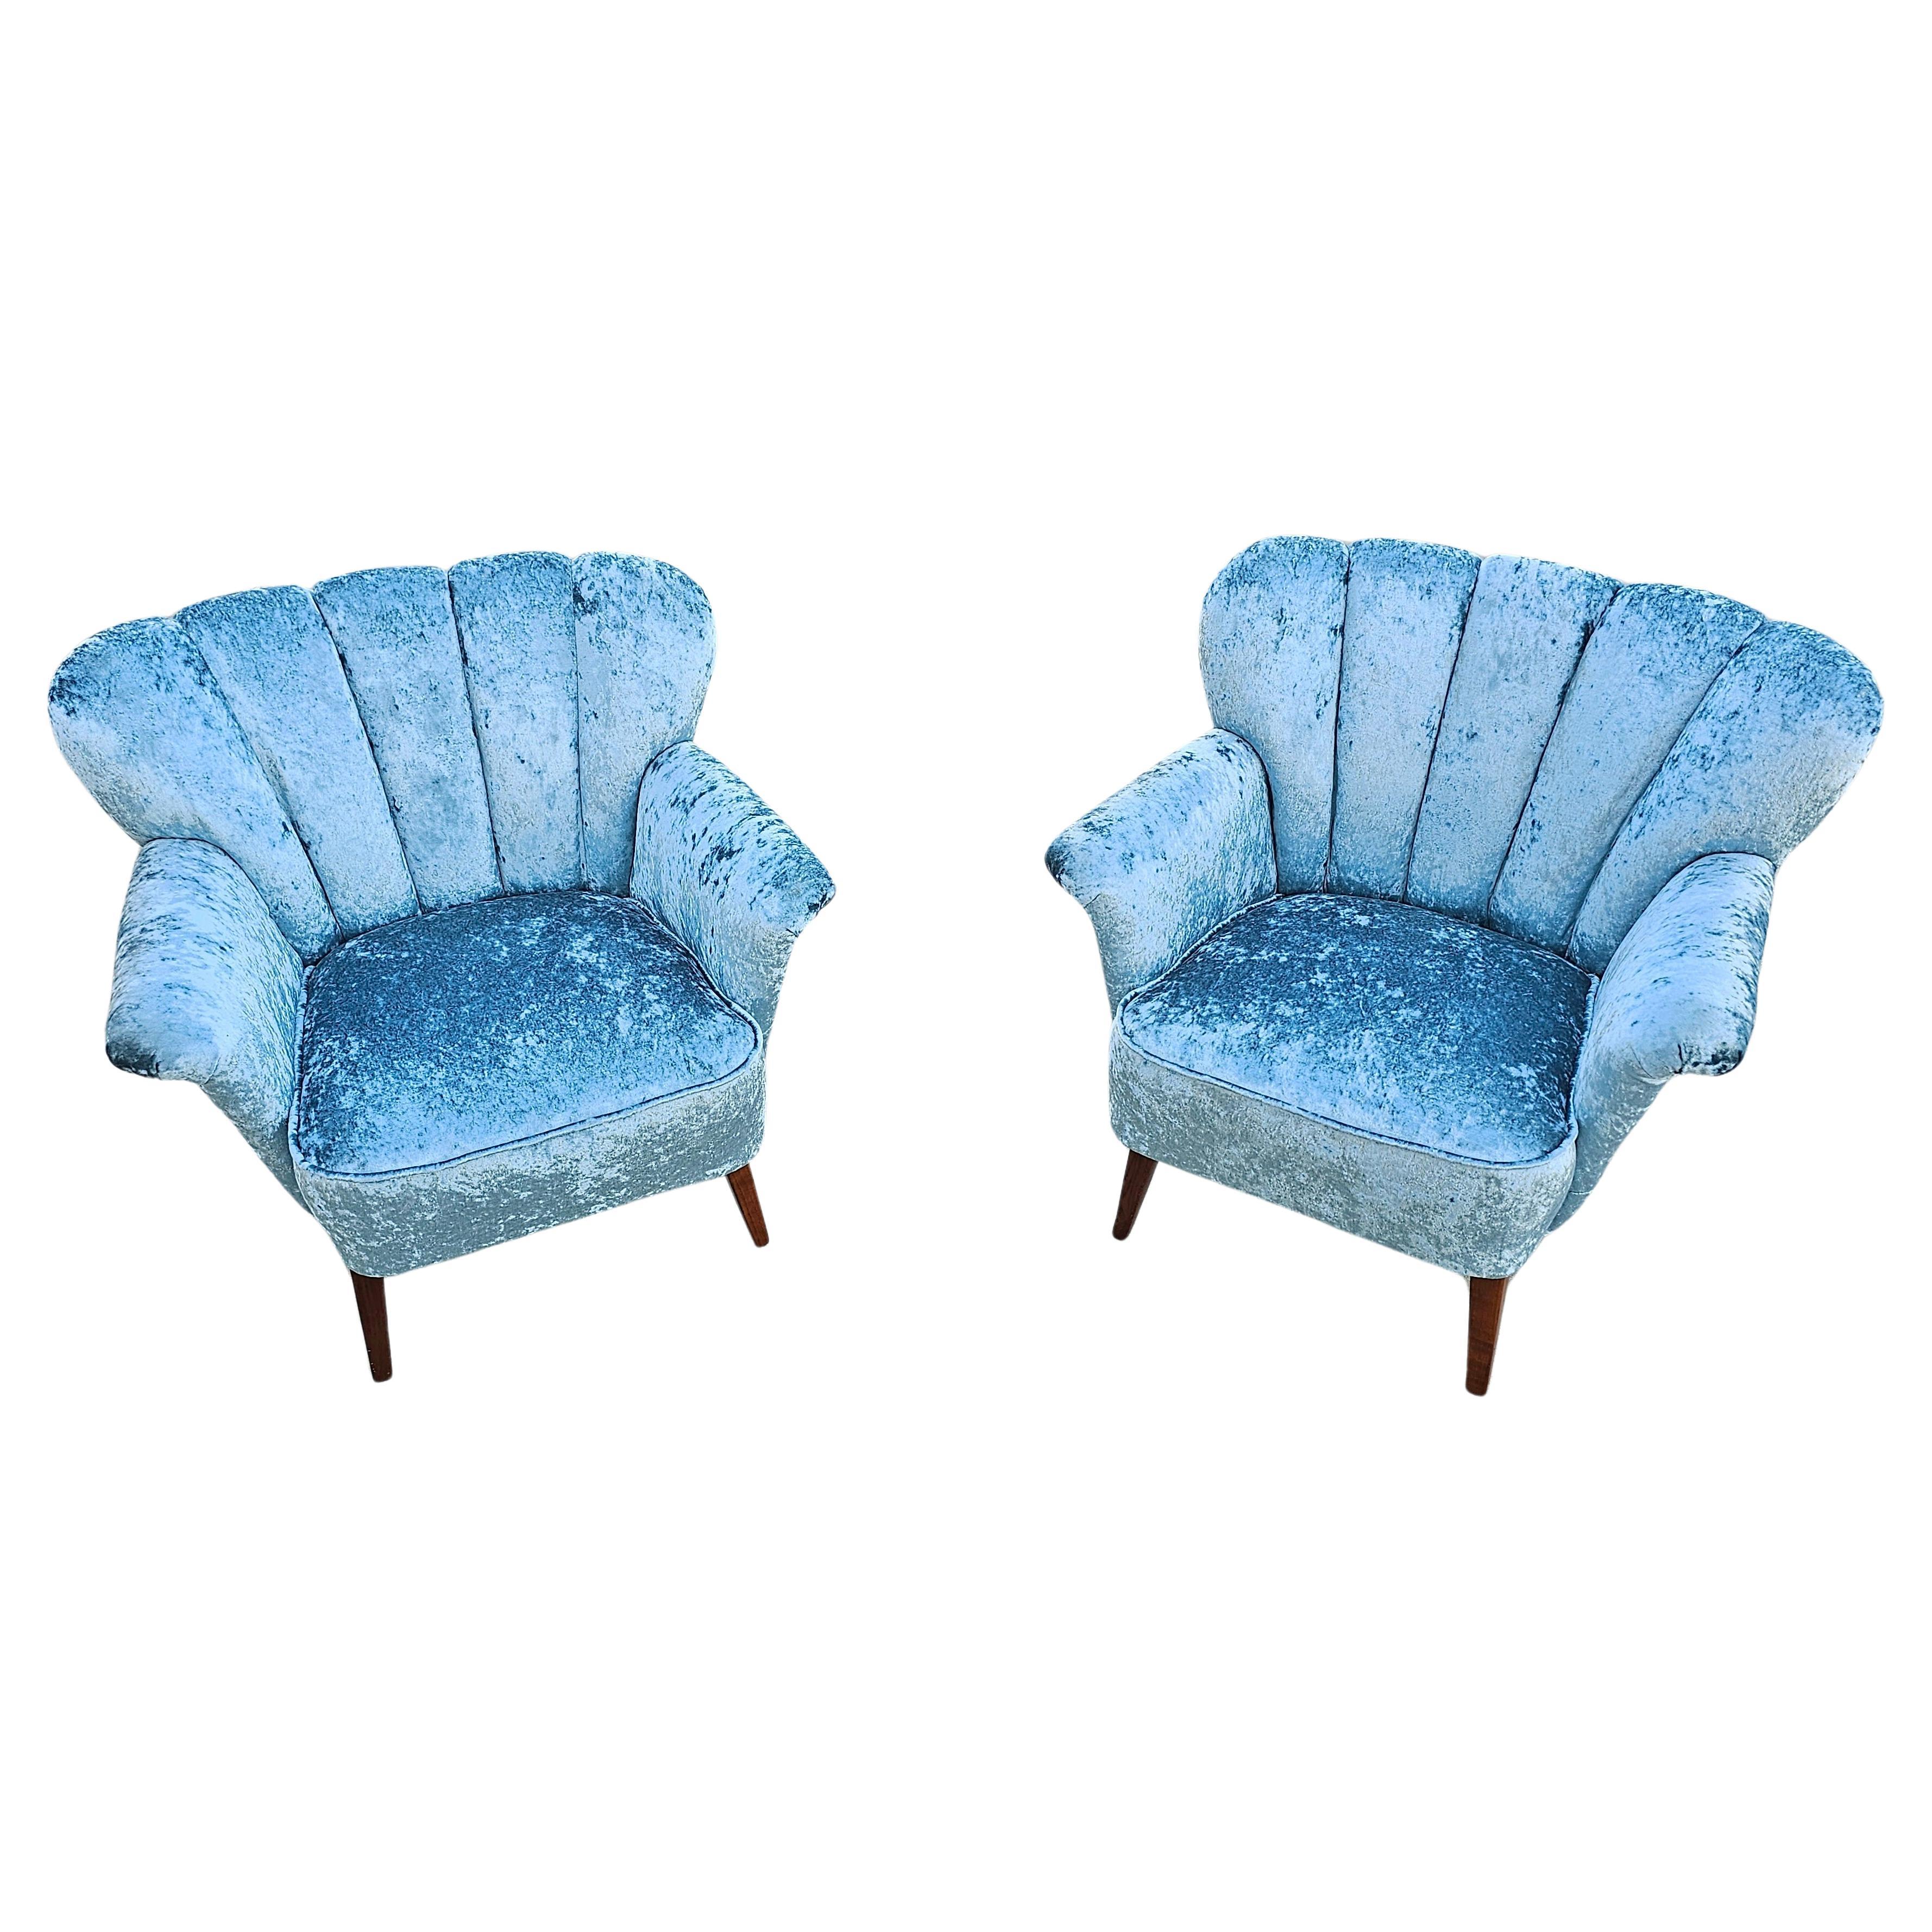 Pair of Mid Century Modern Curved Club or Lounge Chairs, Denmark 1950s For Sale